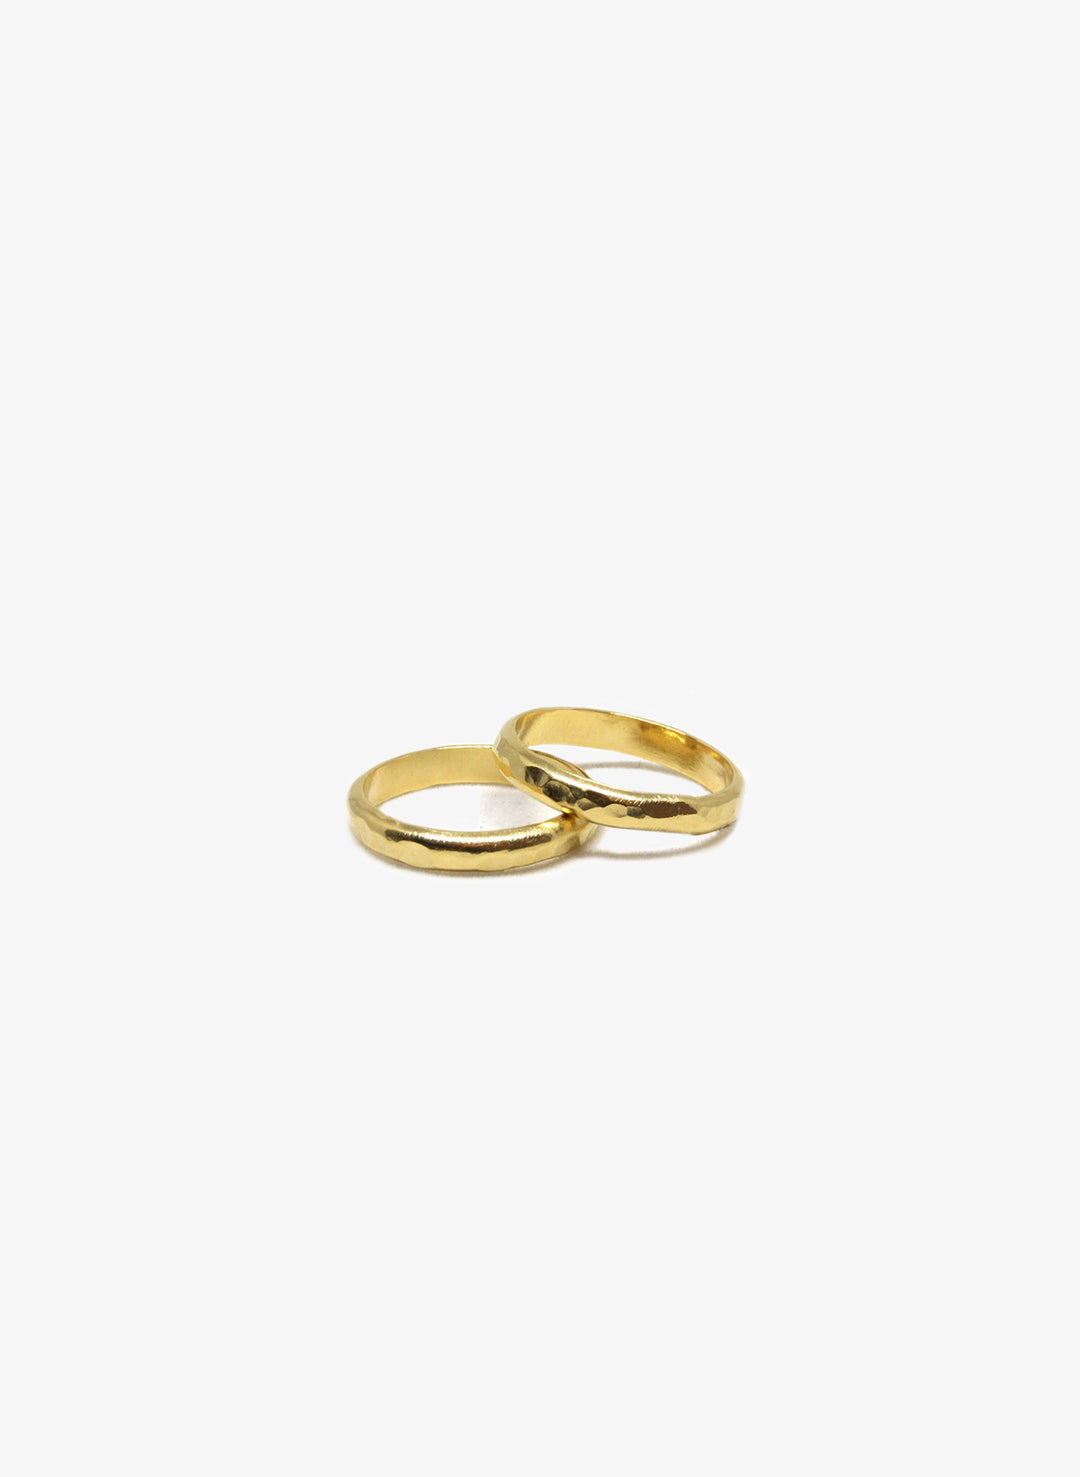 llayers-mens-women-engagement-hammered-stackable-gold-band-ring-one002-brooklyn-newyork-F1